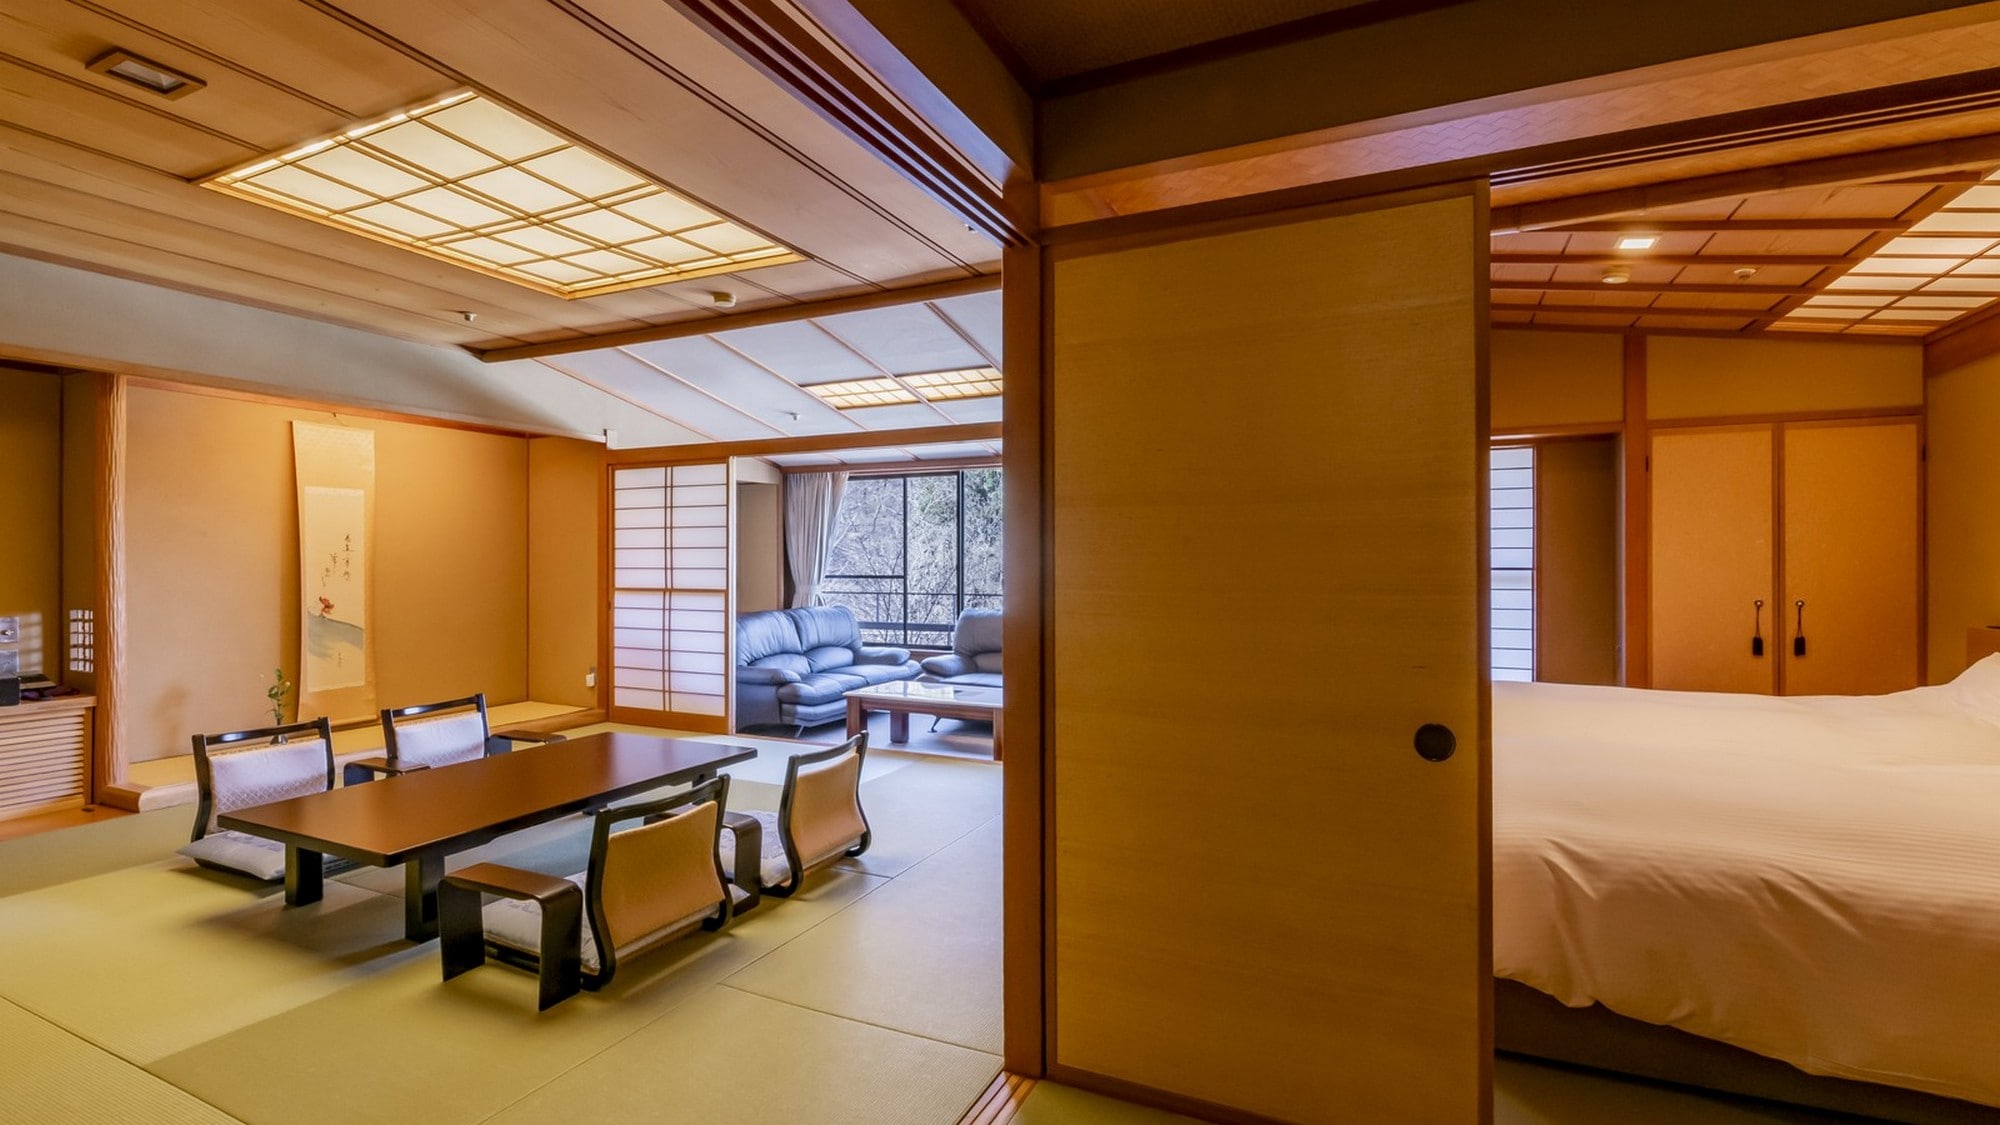 Renewal in January 2019. A Japanese-Western style room with twin beds in one of the two-room rooms